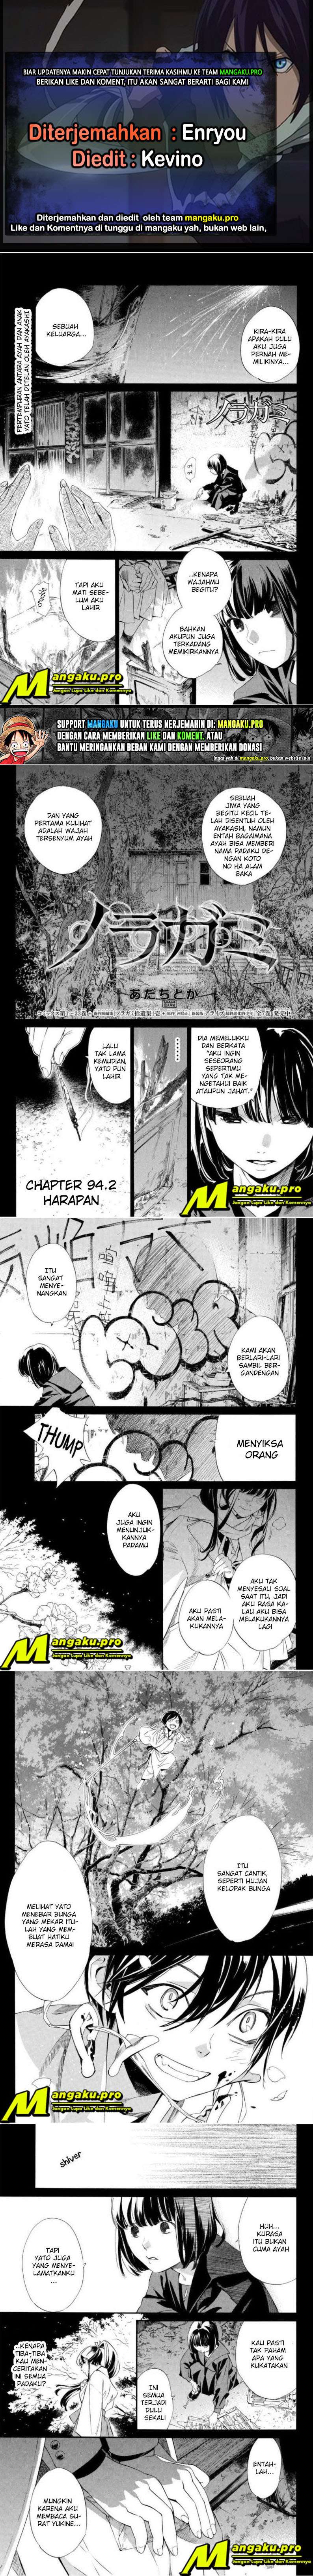 Noragami: Chapter 94.2 - Page 1